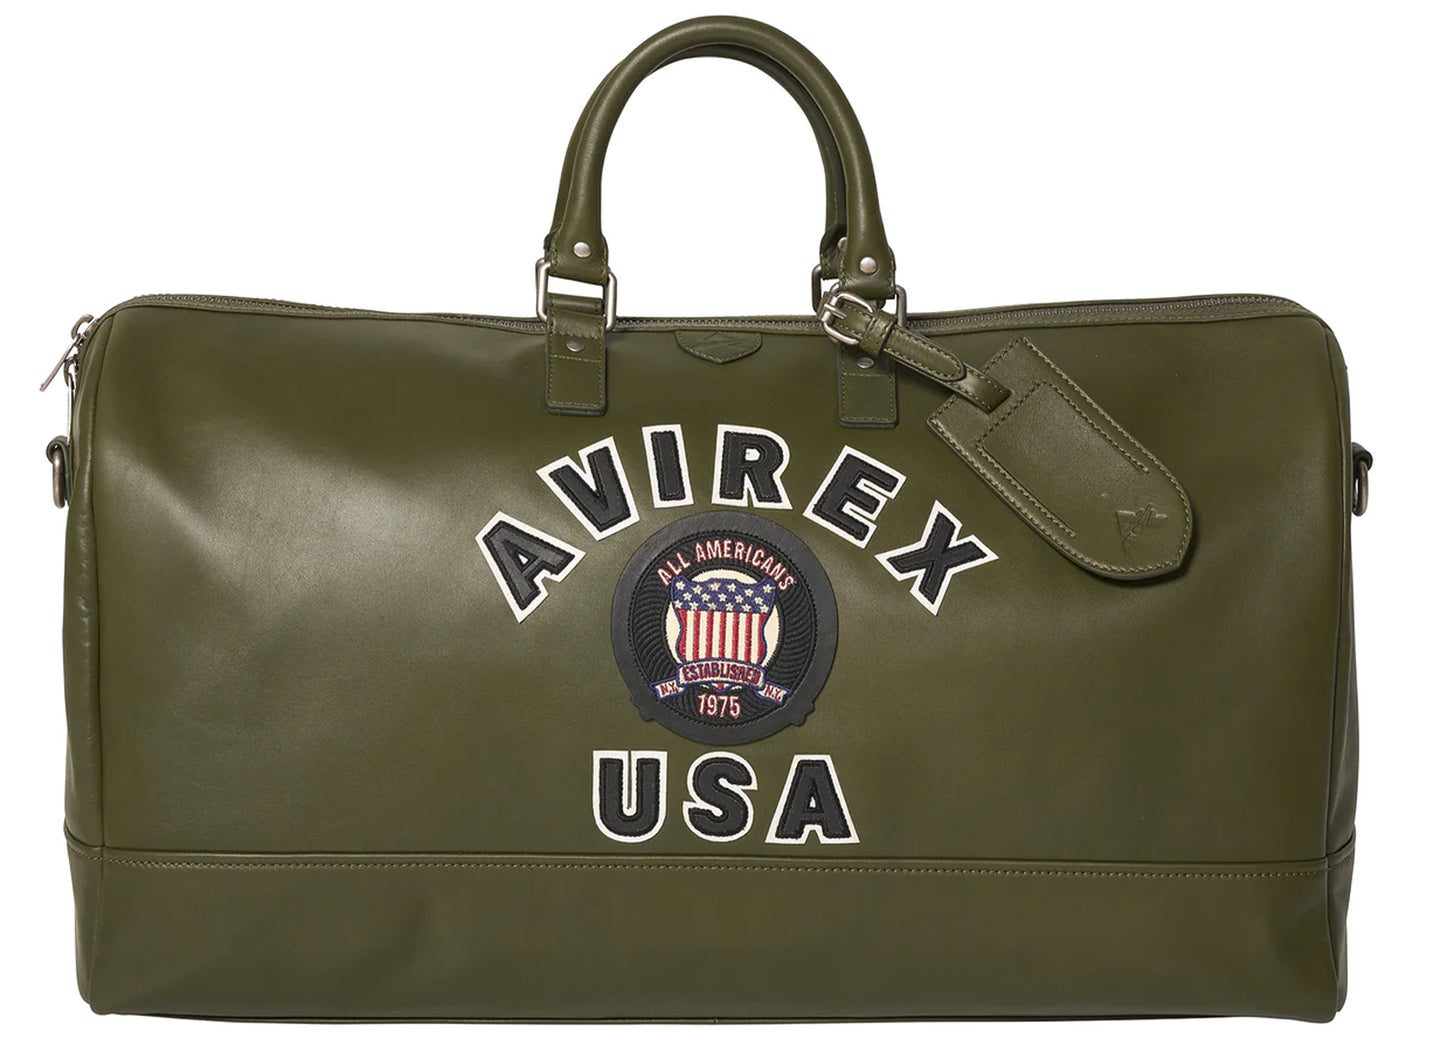 Avirex Icon Duffle Bag in Olive xld